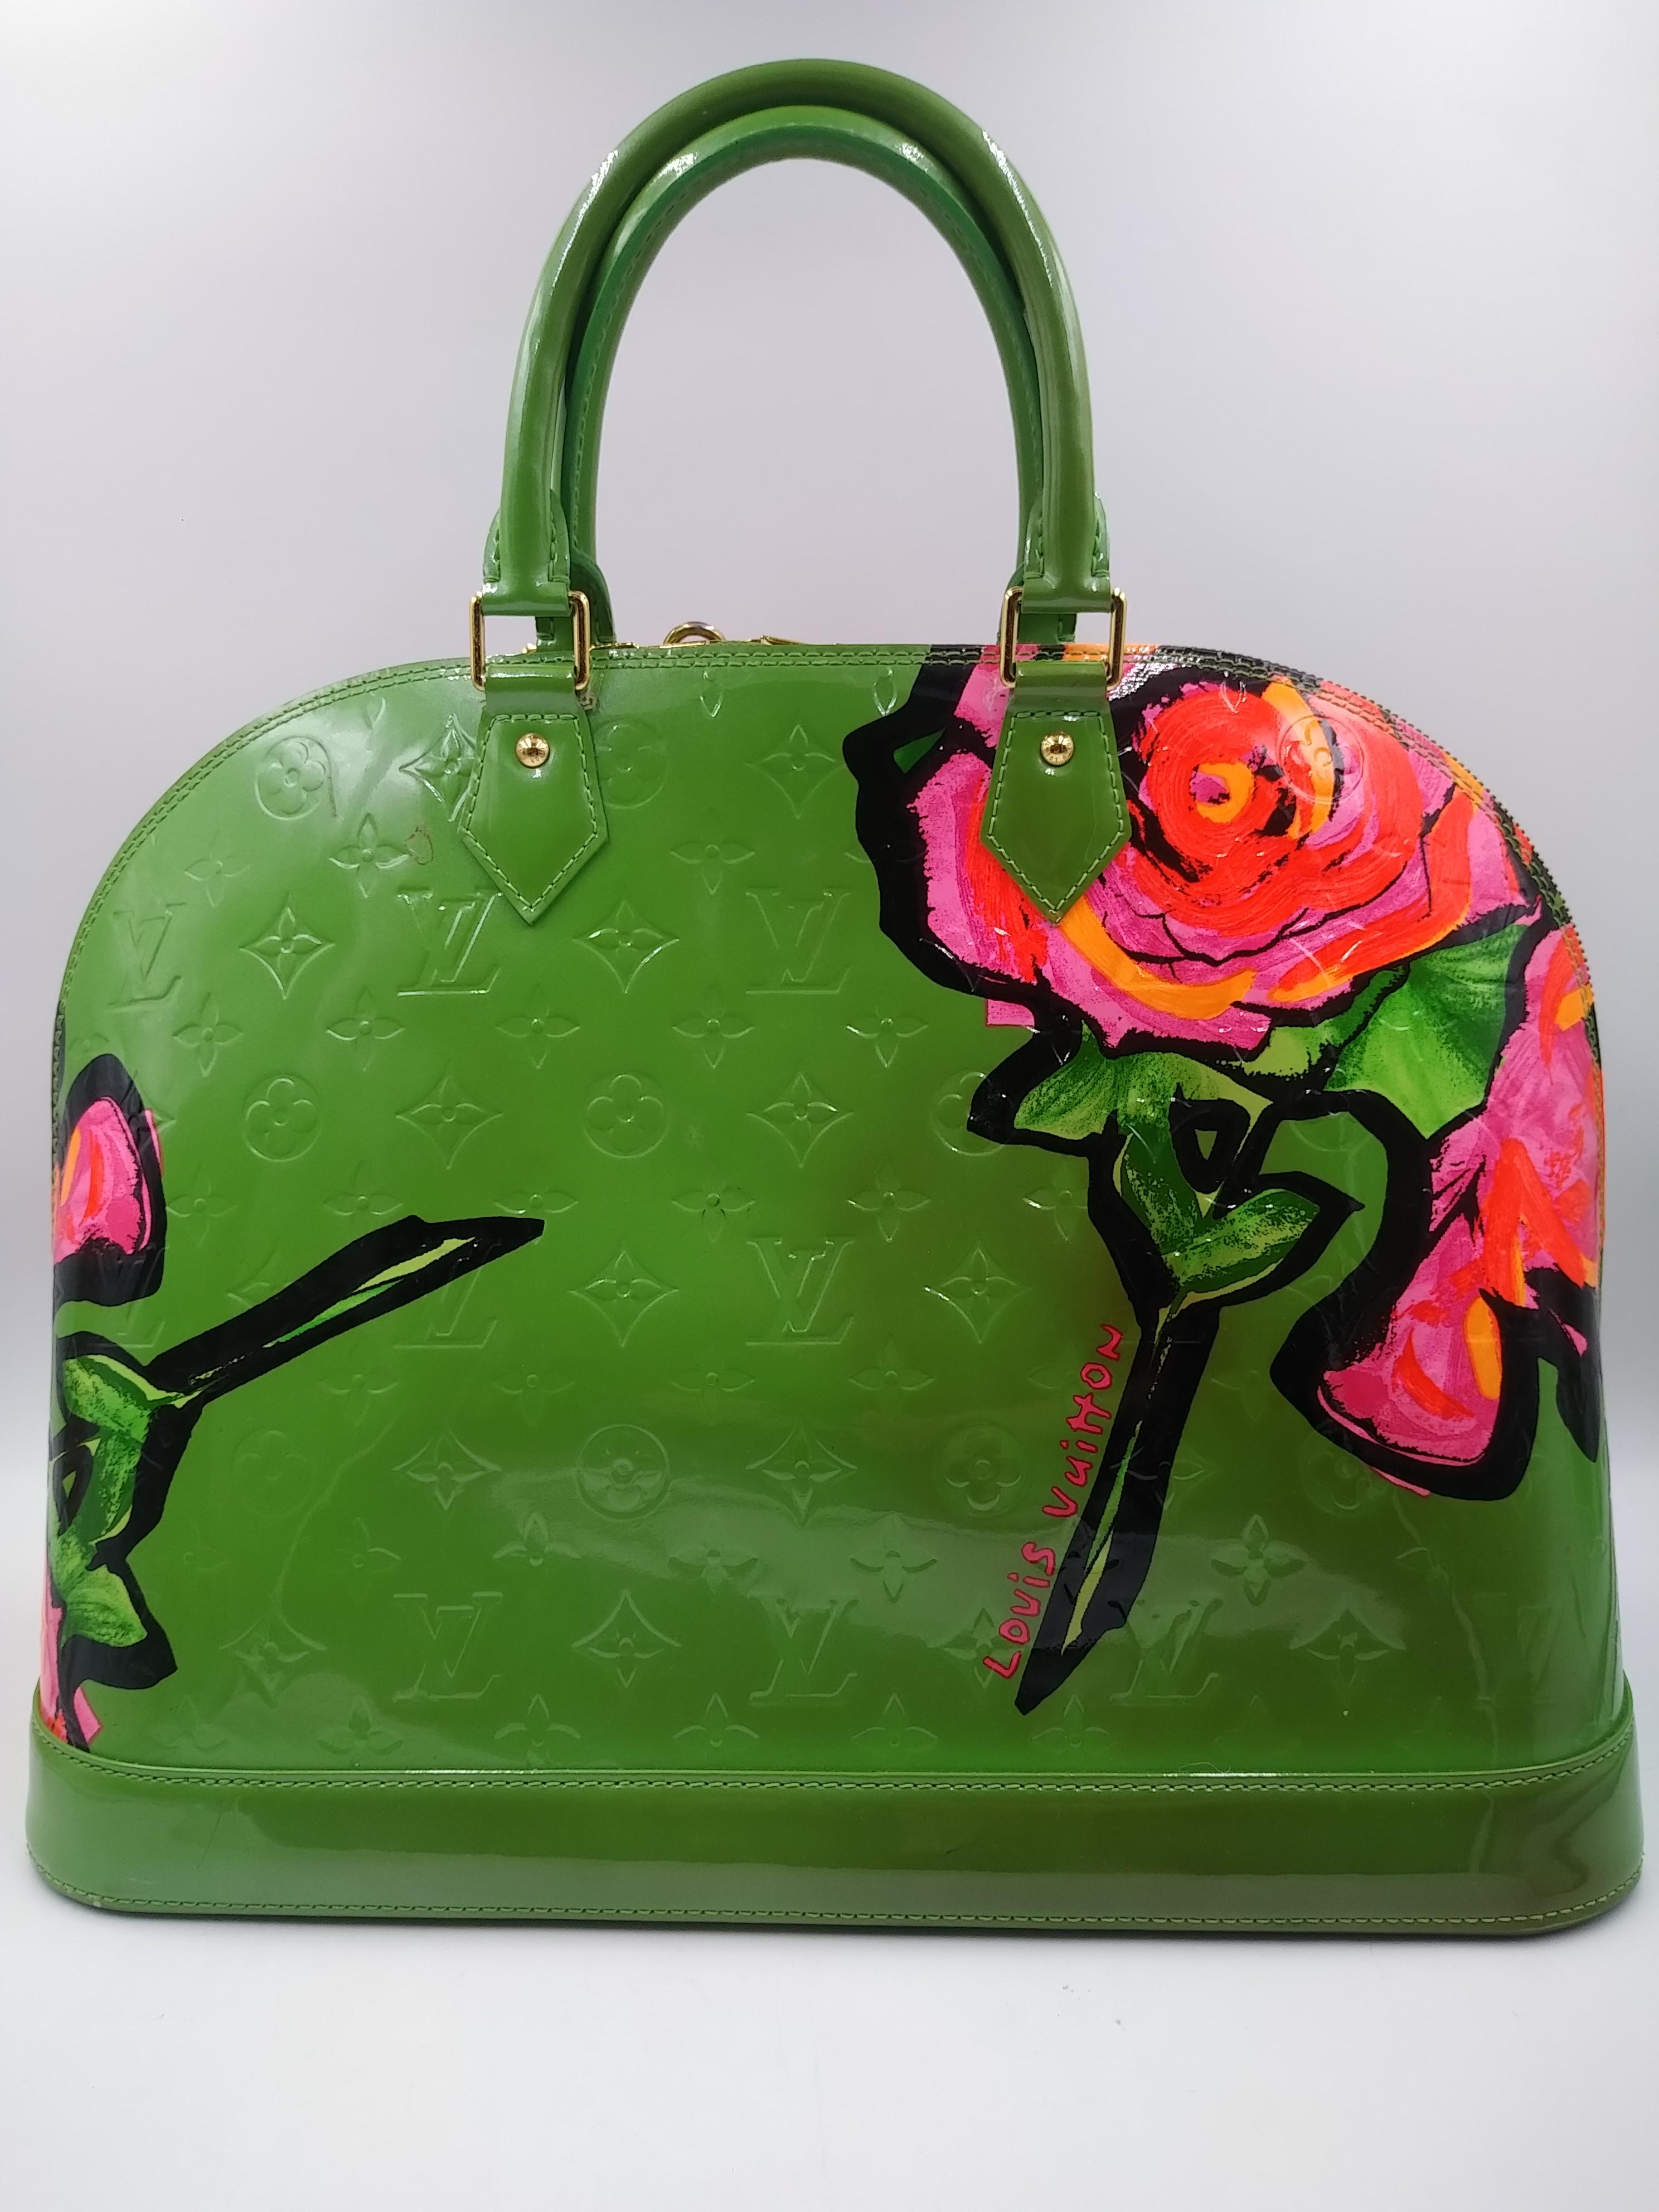 Louis Vuitton Green Monogram Vernis Limited Edition Stephen Sprouse Roses Alma GM bag, 2009. 
This Alma GM bag by Louis Vuitton comes with the Stephen Sprouse roses print. Crafted from monogrammed vernis, it features dual top rolled handles along